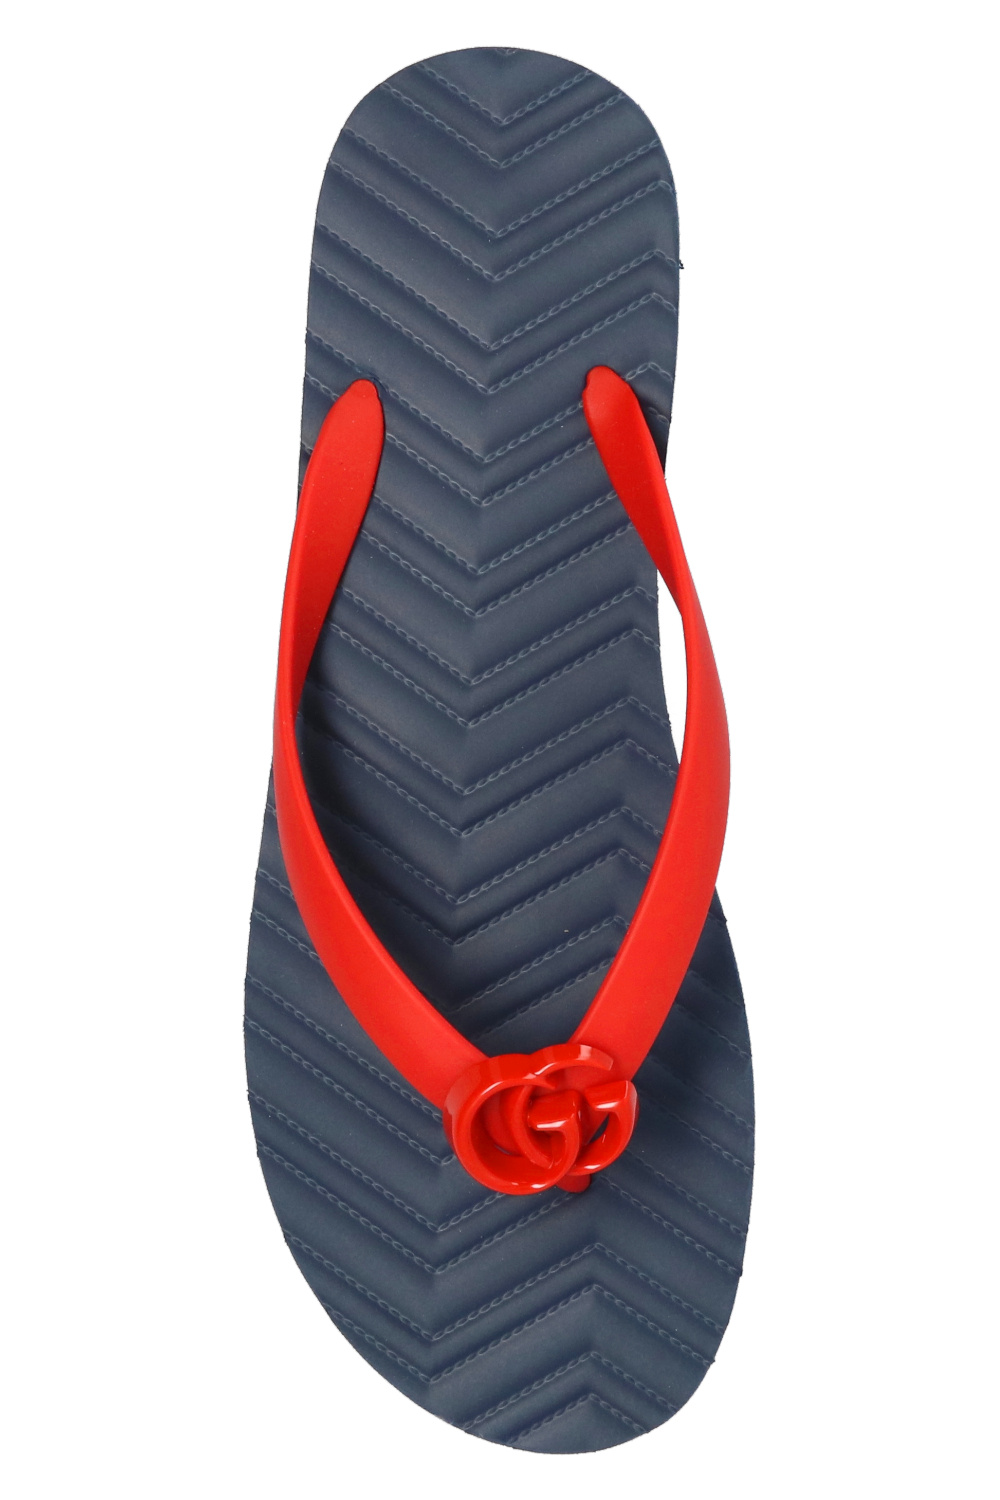 Gucci Flip-flops with logo